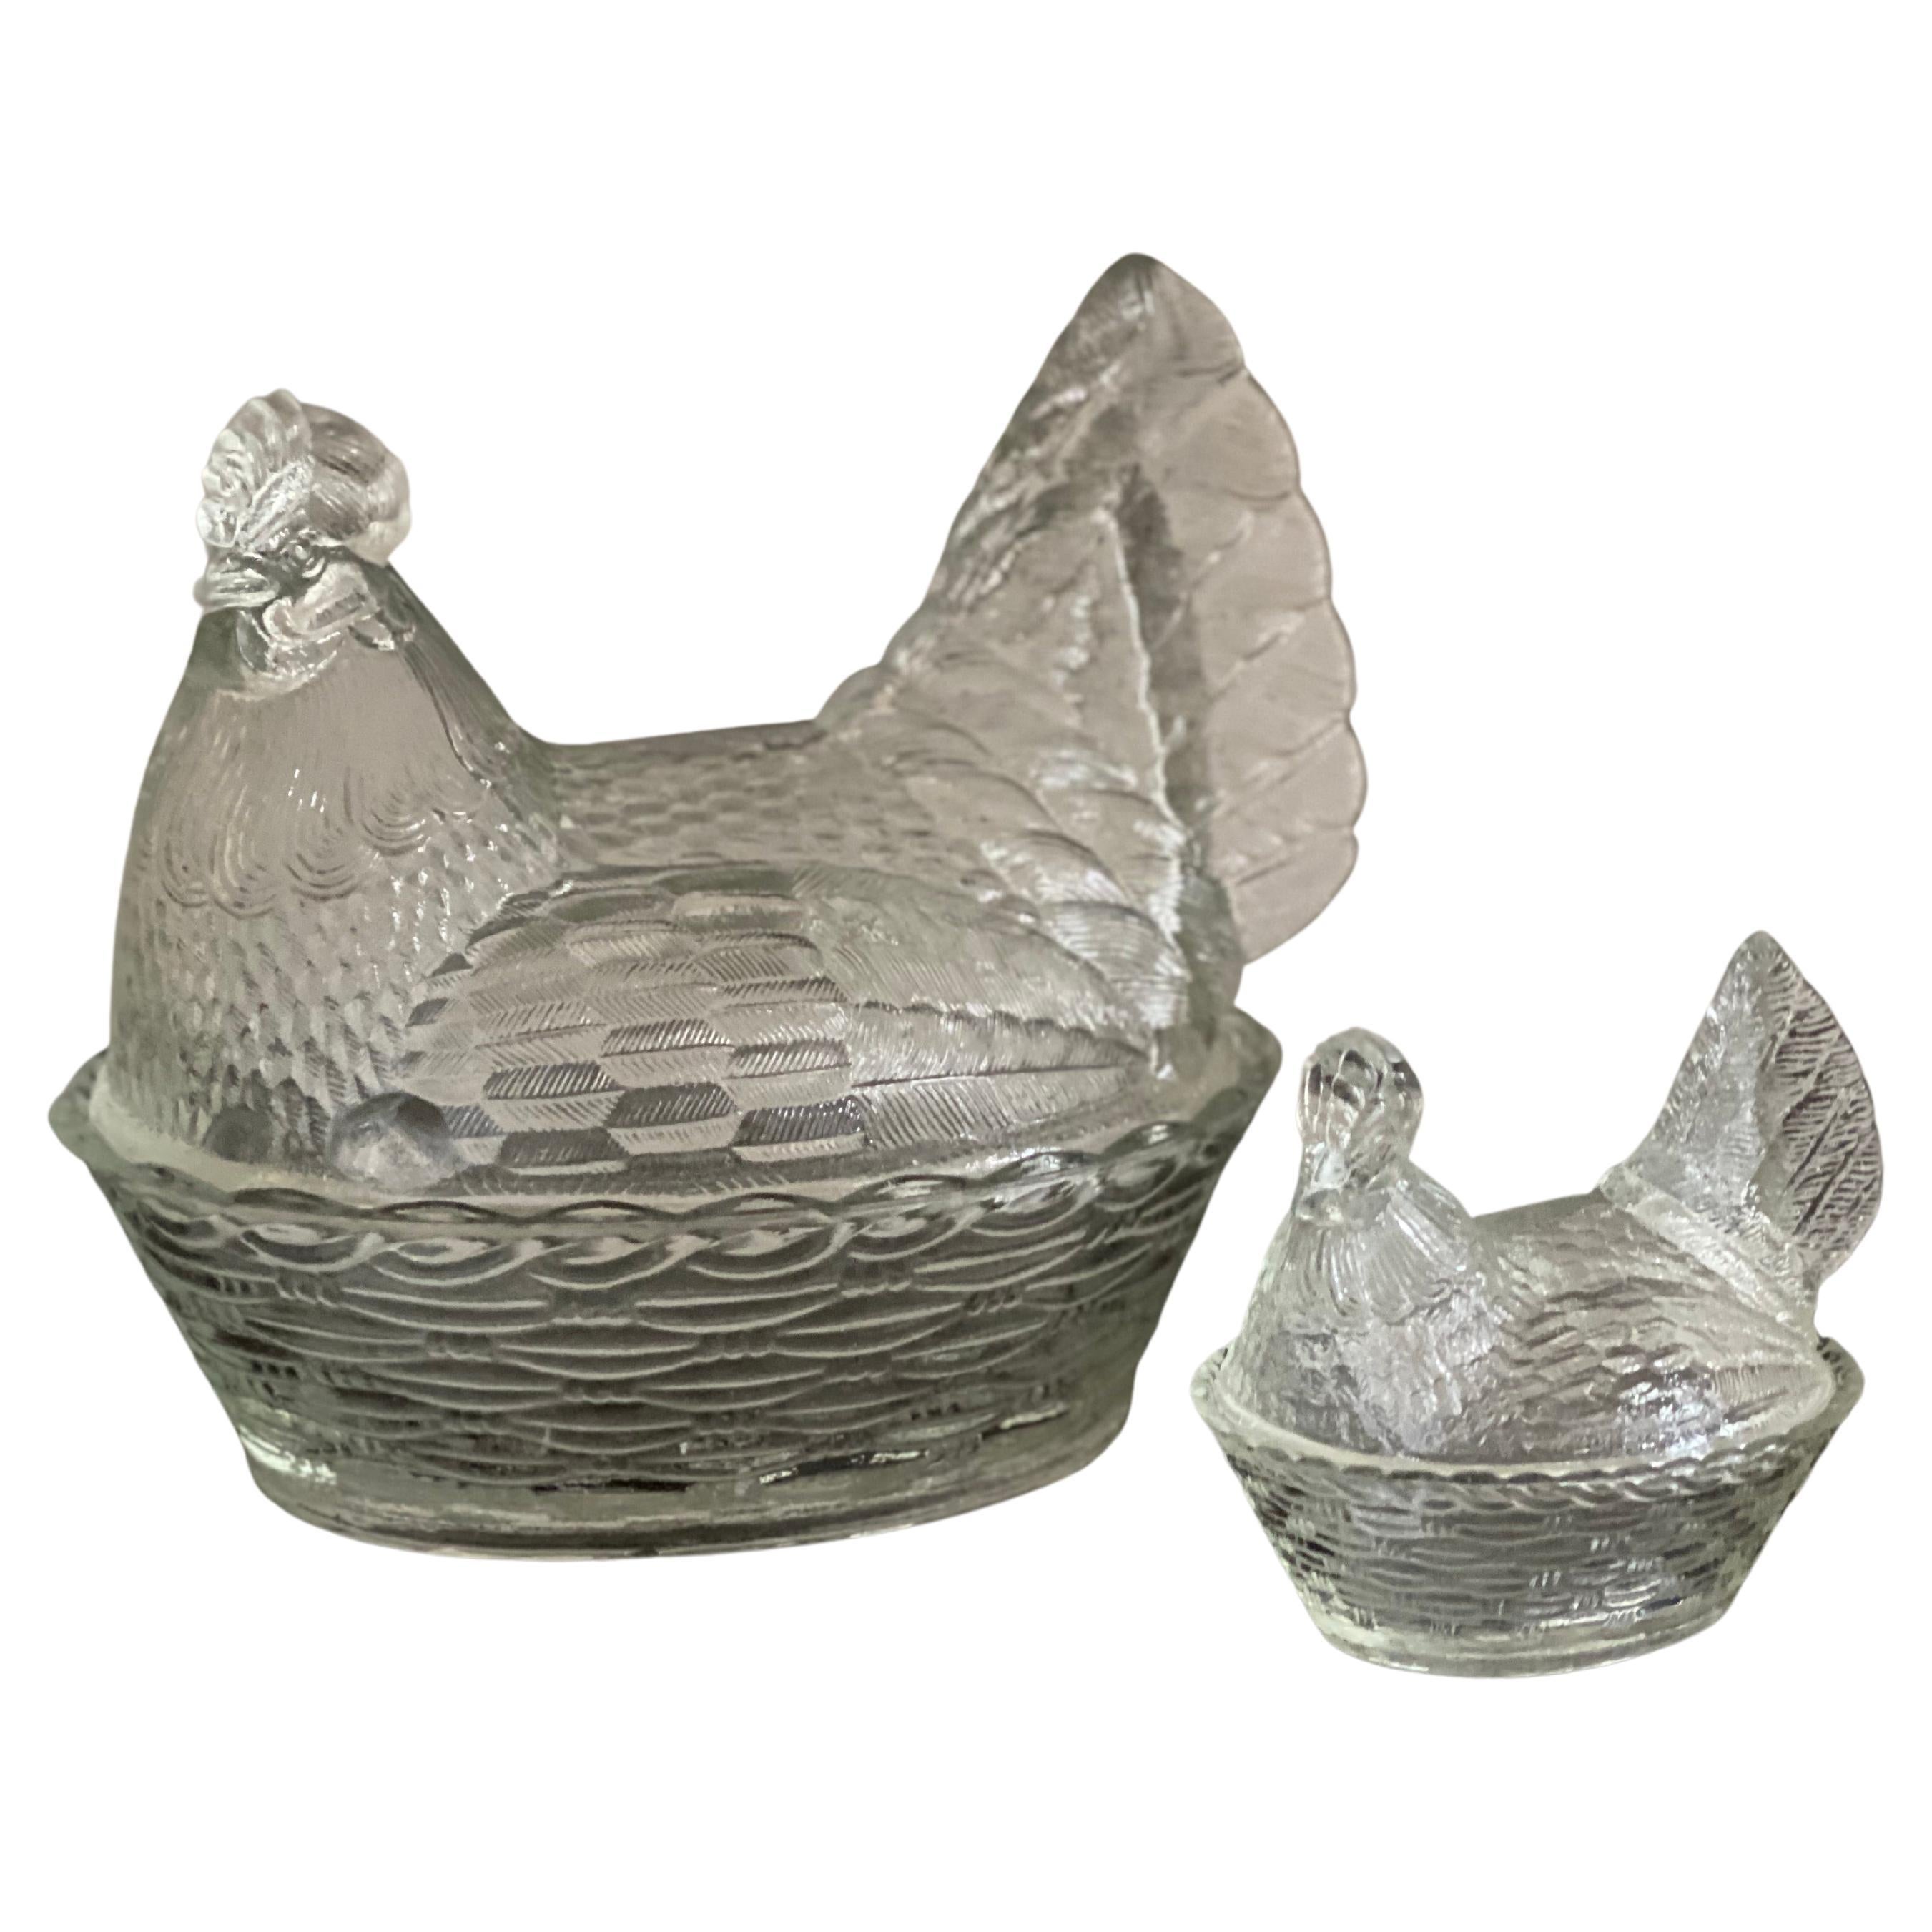 Pair of Lidded Cans/Bonbonniere Made of Pressed Glass, Hens in a Basket For Sale